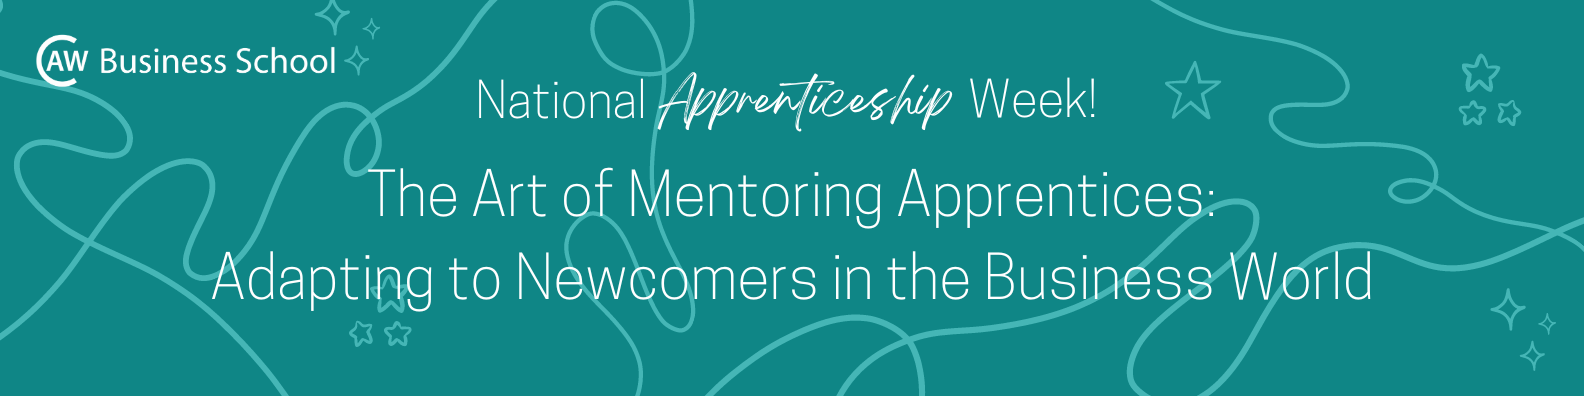 The Art of Mentoring Apprentices: Adapting to Newcomers in the Business World